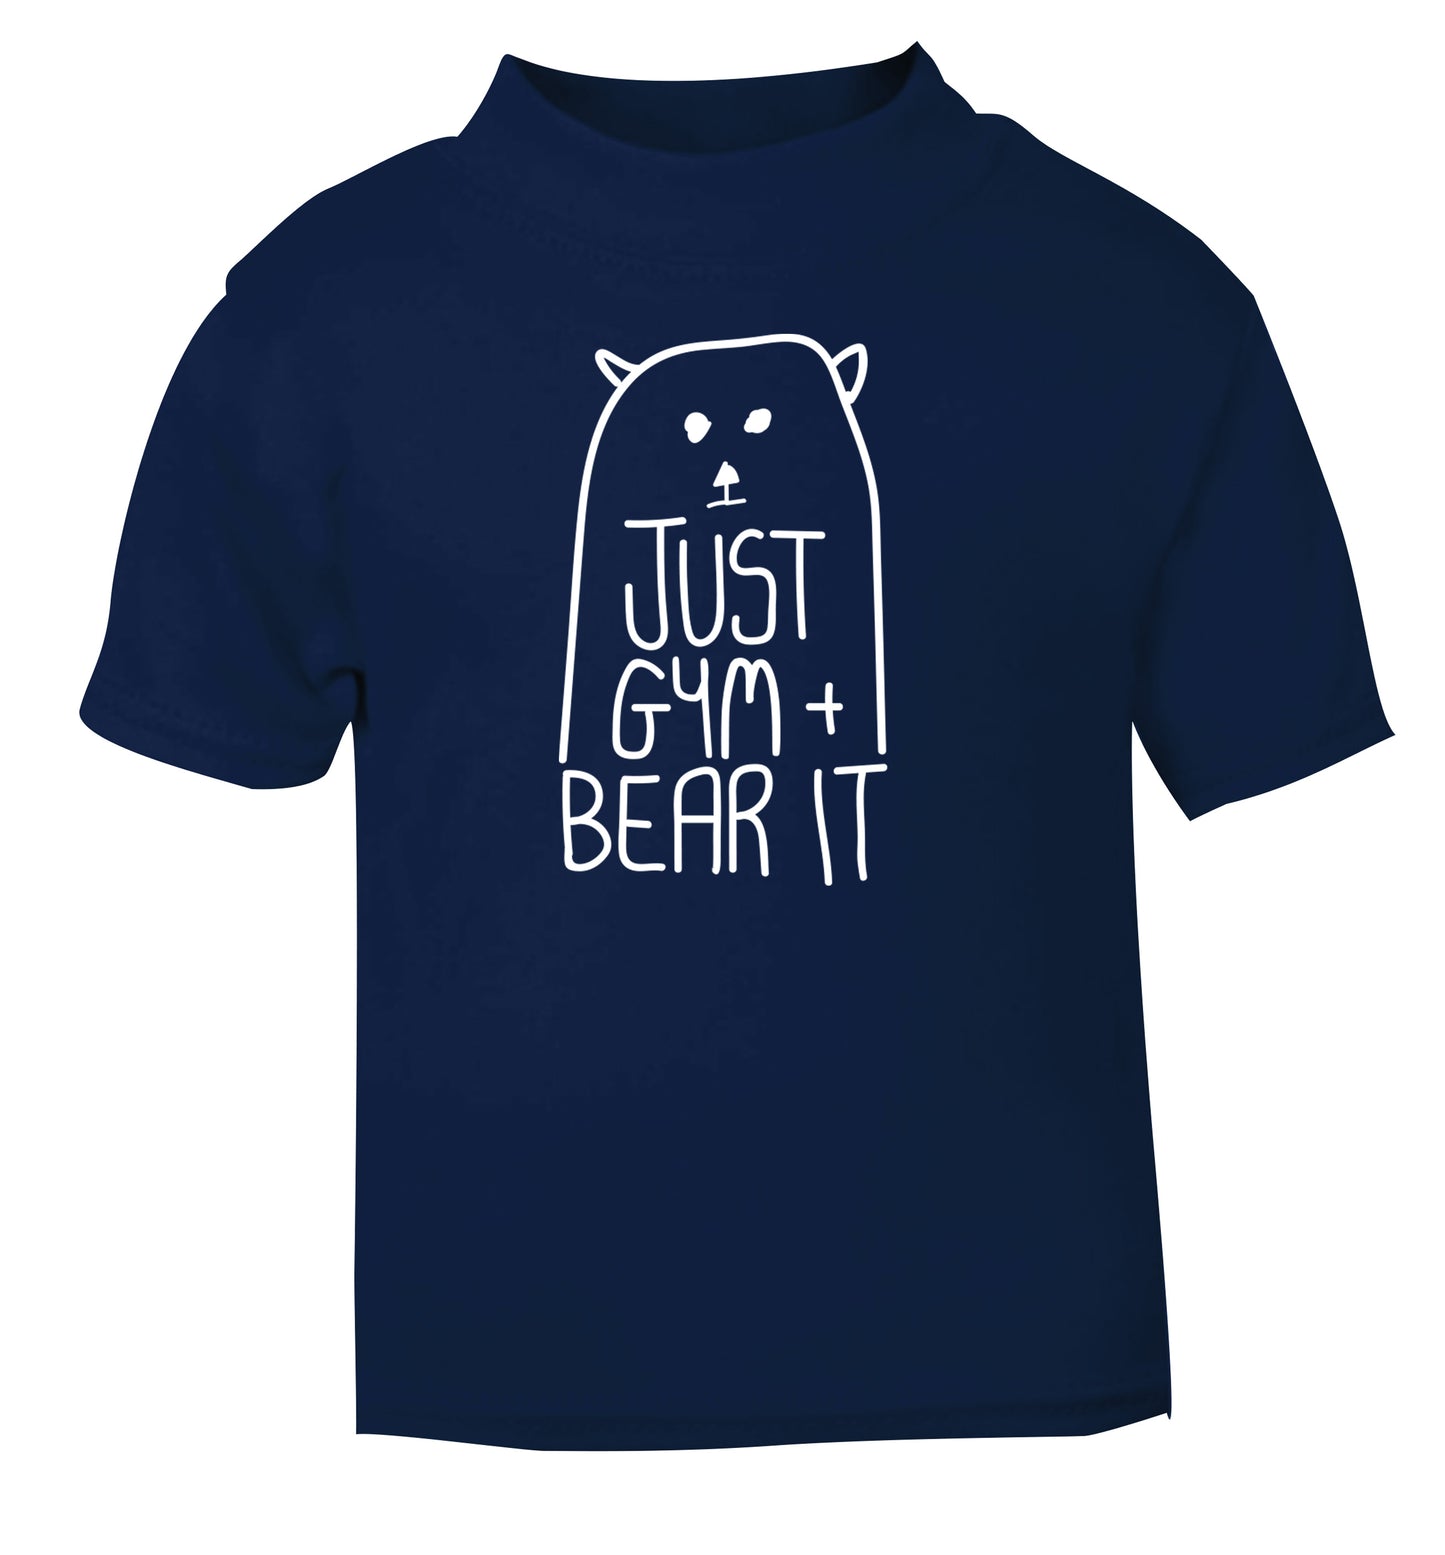 Just gym and bear it navy Baby Toddler Tshirt 2 Years